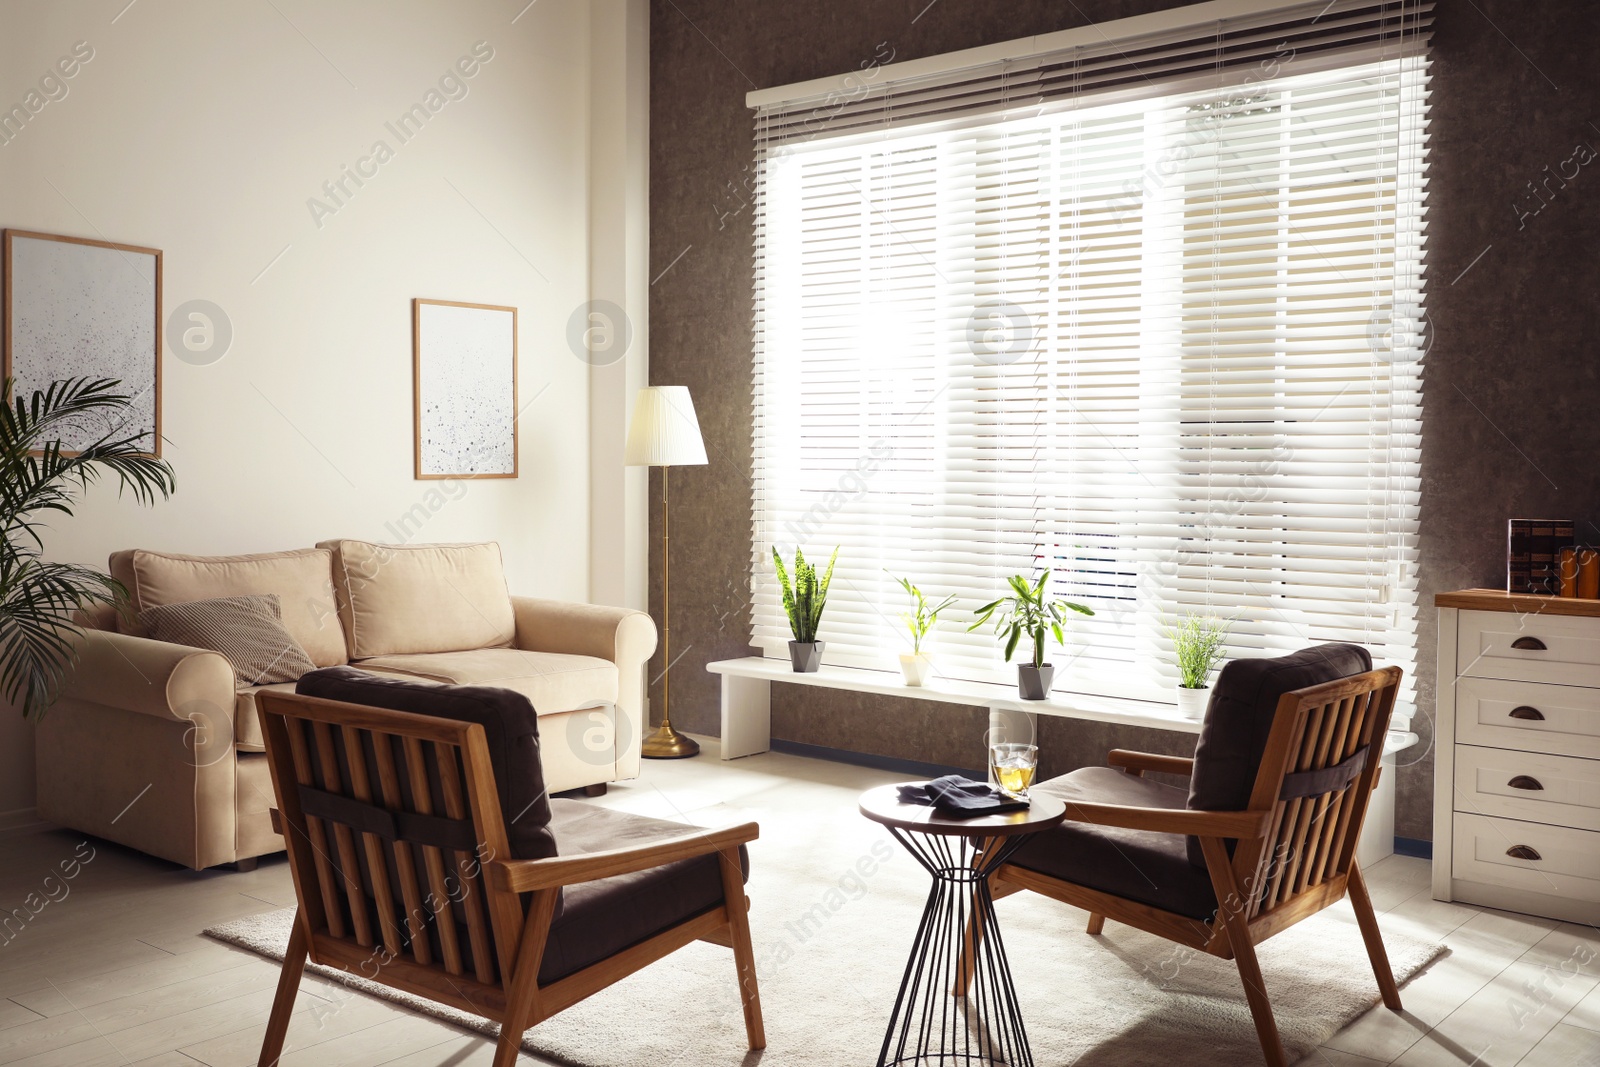 Photo of Living room interior with comfortable sofa and armchairs